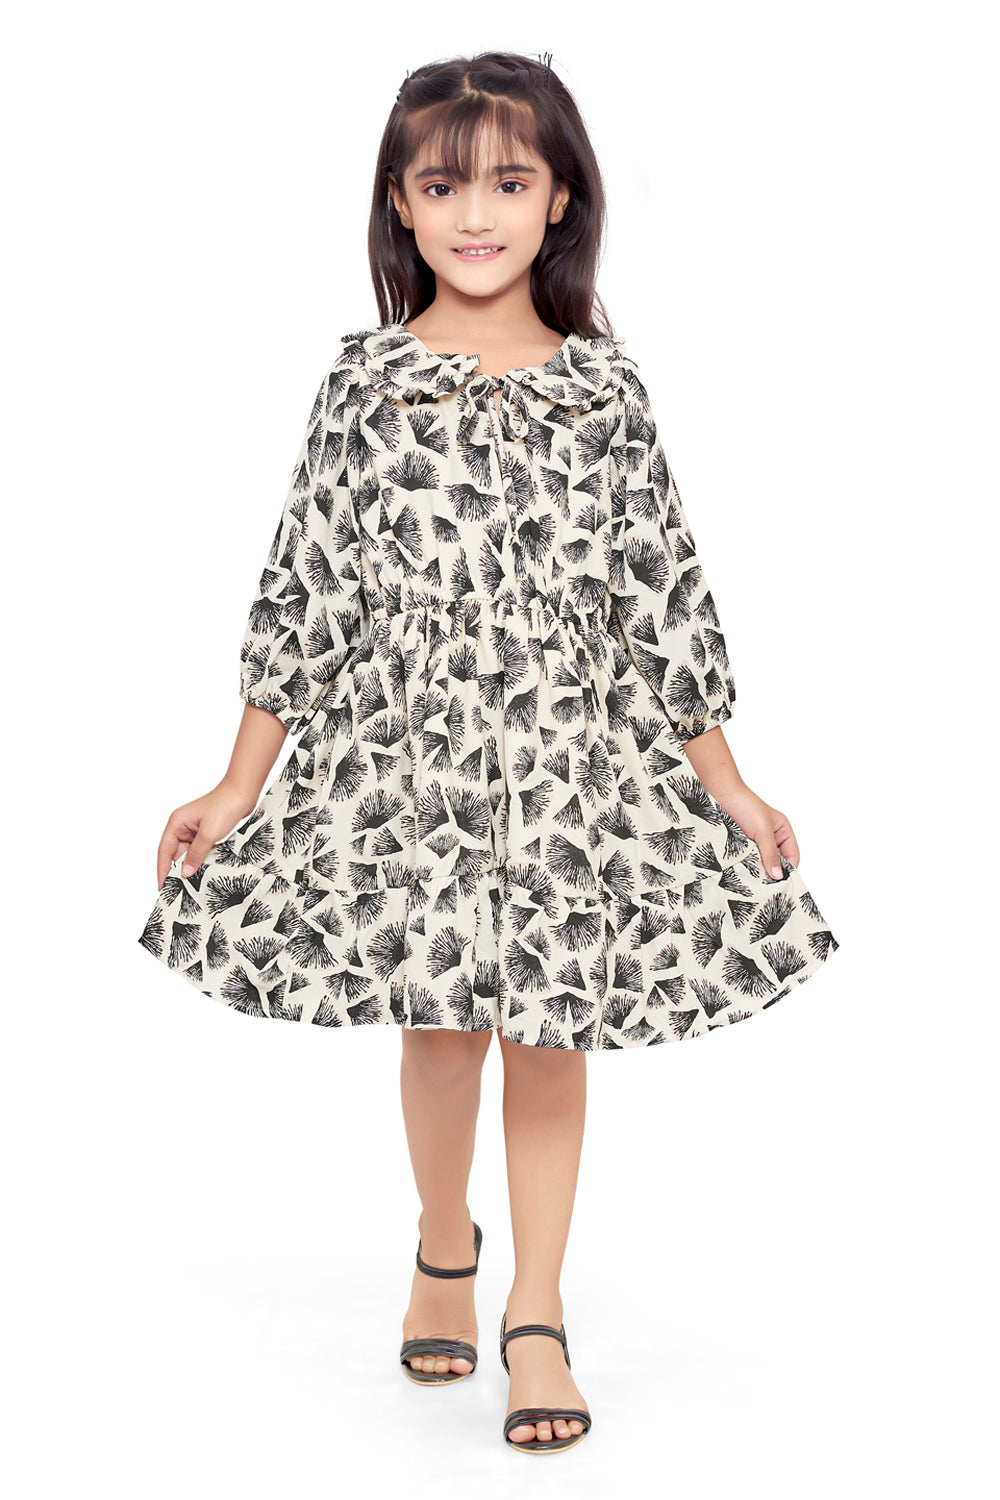 Black and Offwhite Crepe Abstract Printed Dress